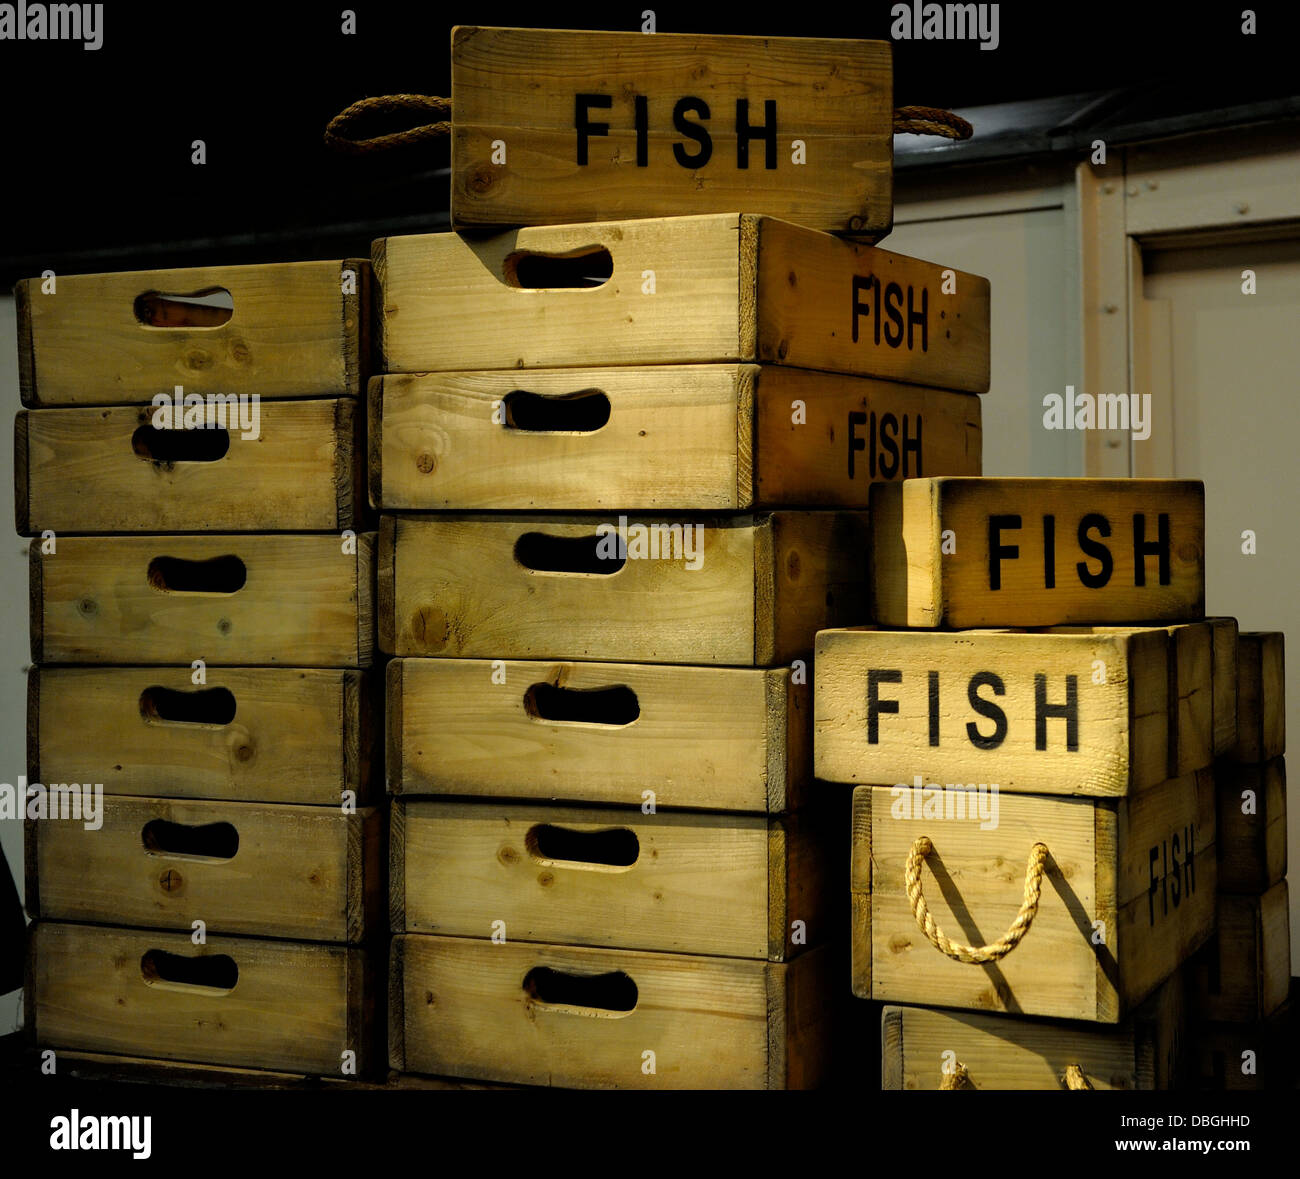 Wooden fish crates Stock Photo